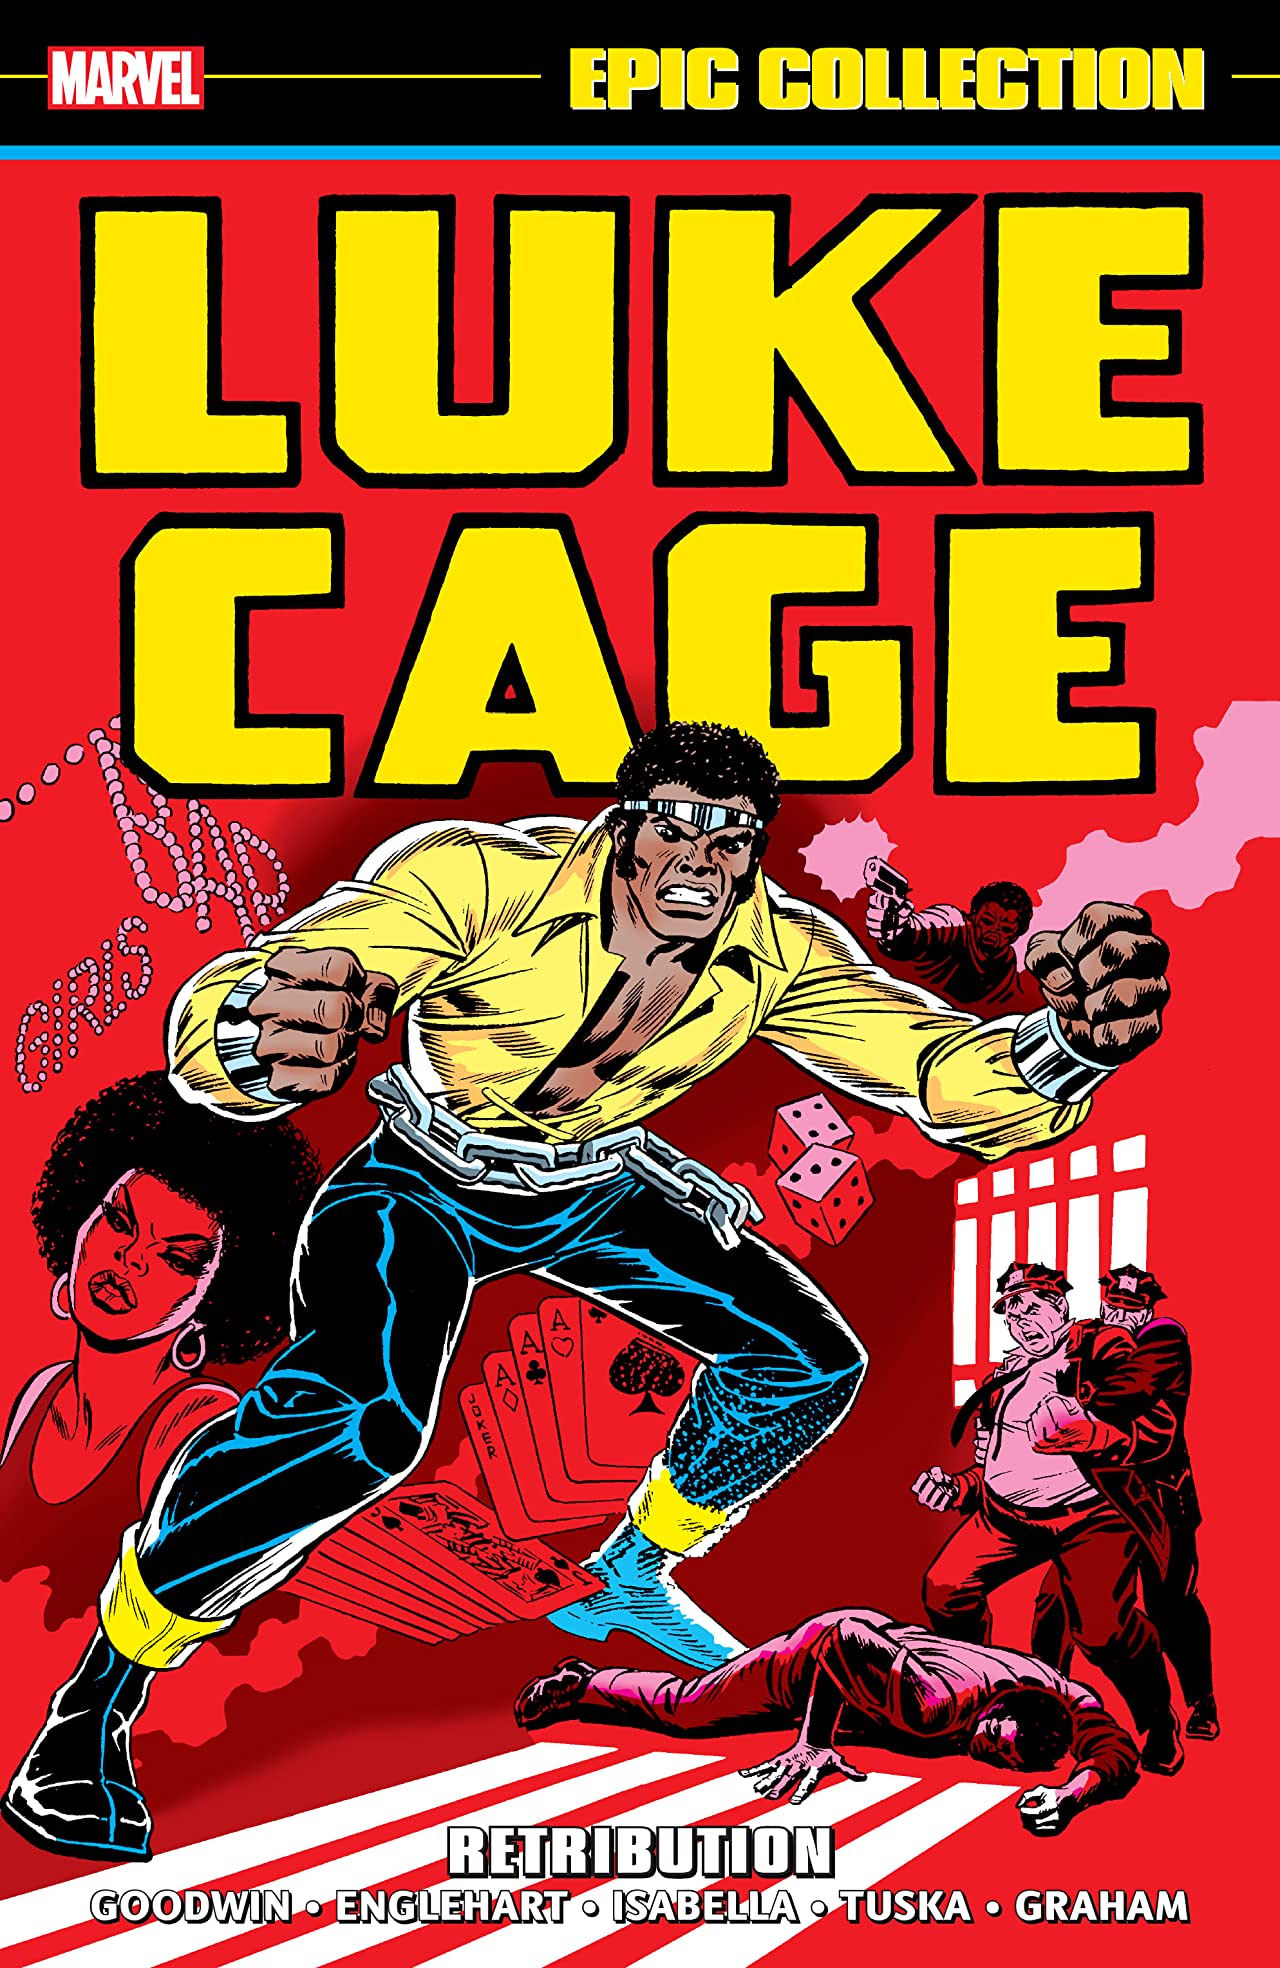 Lukee Cage Epic Collection Graphic Novel Volume 1 Retribution